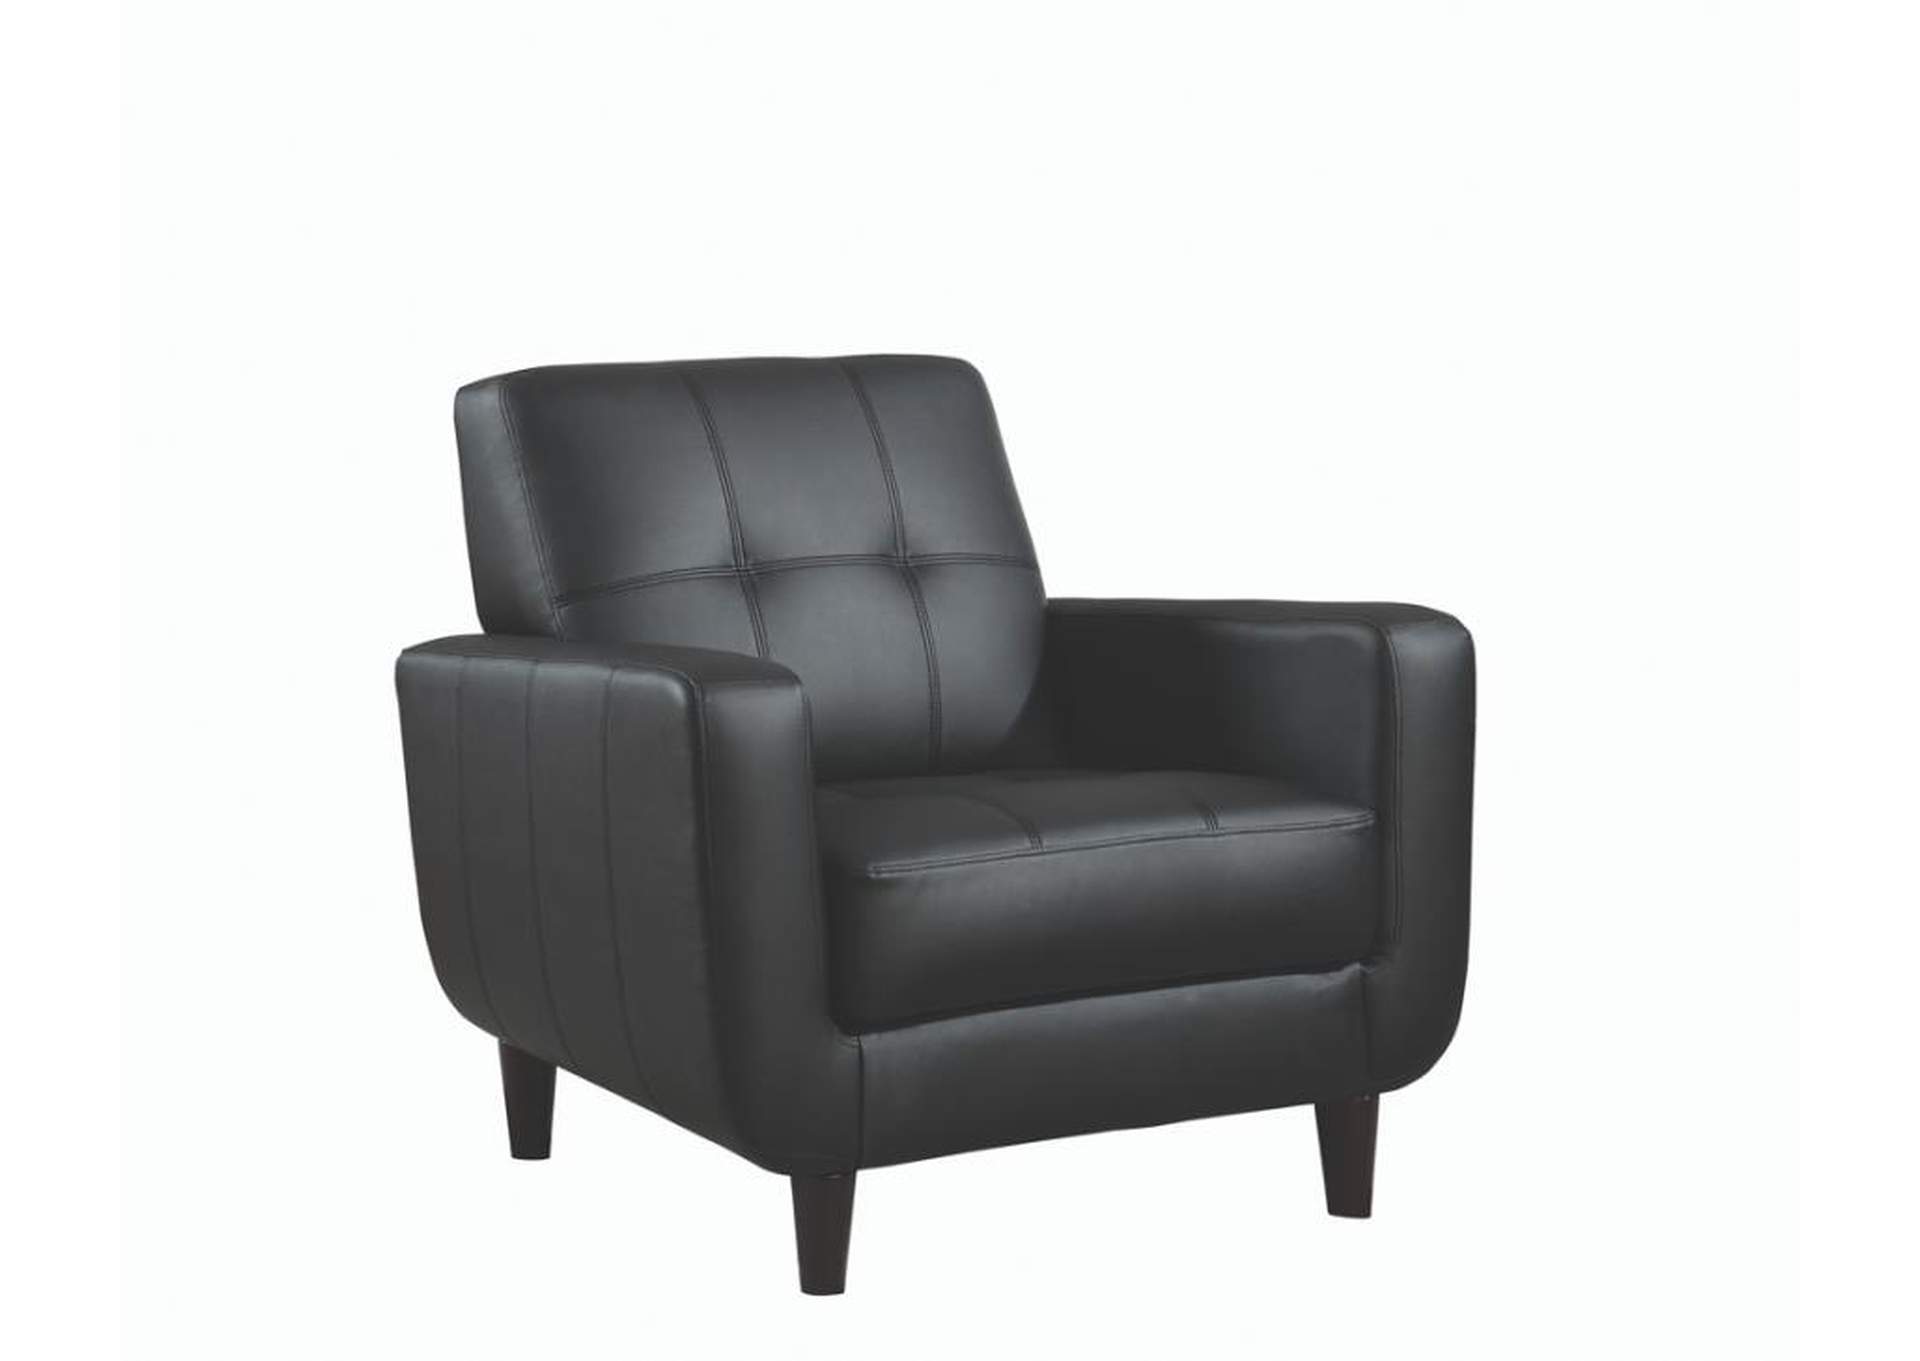 Padded Seat Accent Chair Black,Coaster Furniture